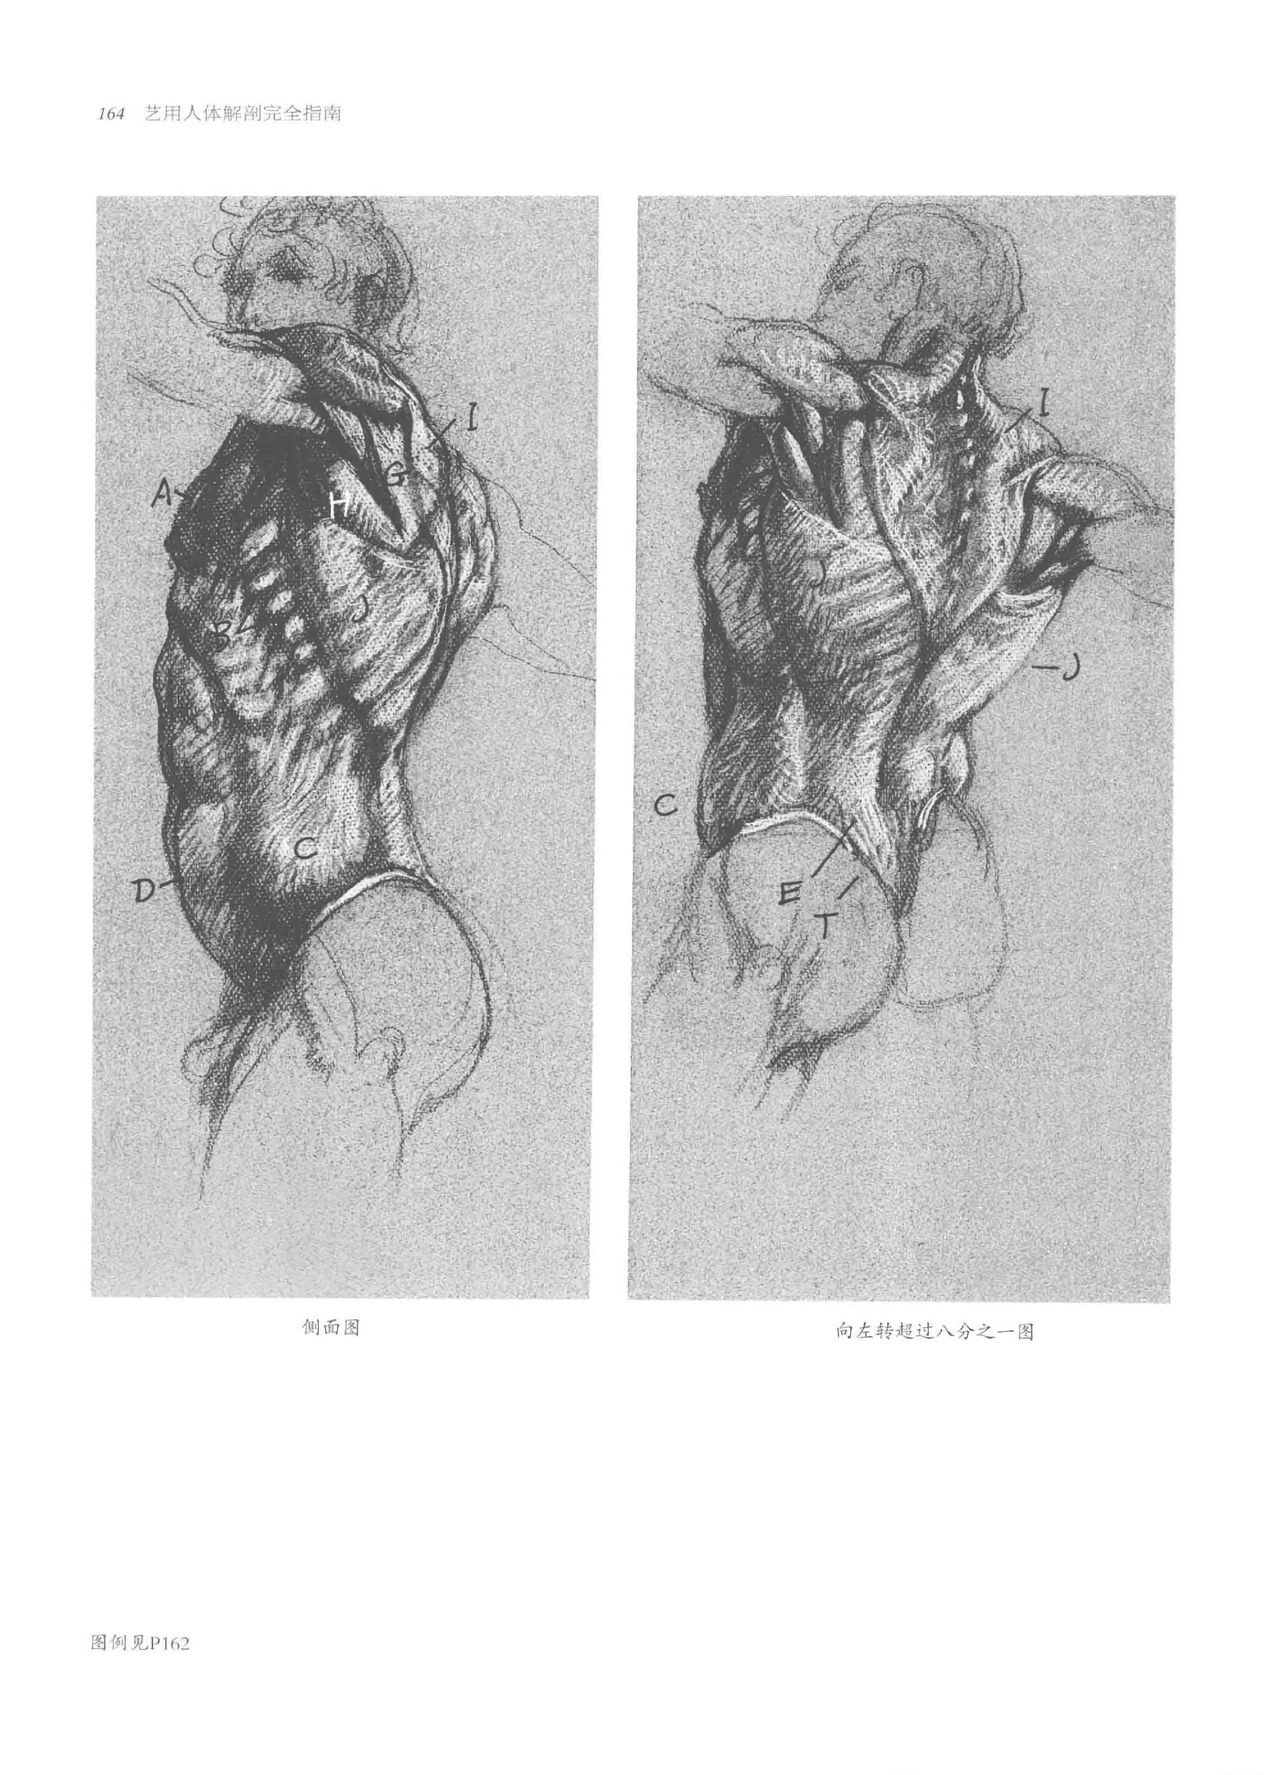 Anatomy-A Complete Guide for Artists - Joseph Sheppard [Chinese] 164